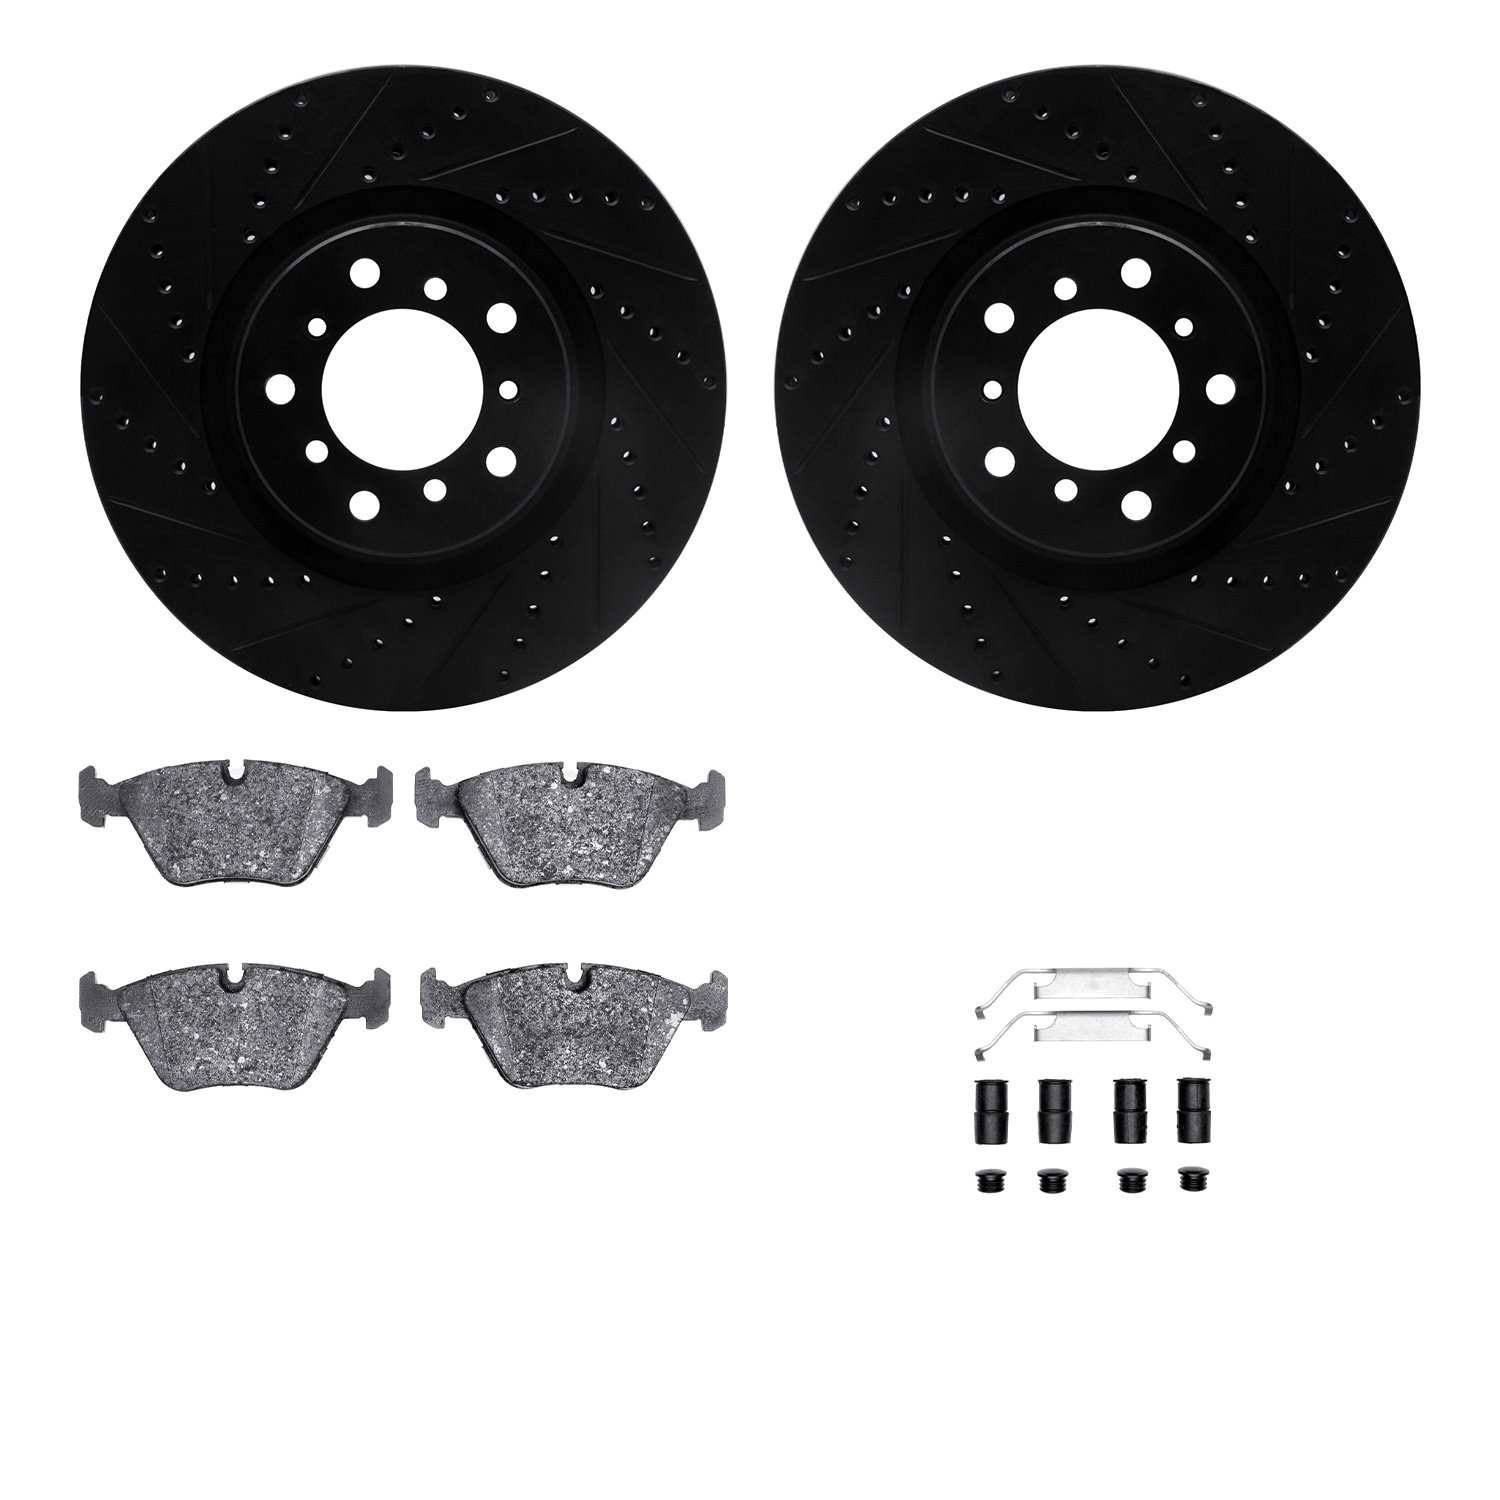 8312-31024 Drilled/Slotted Brake Rotors with 3000-Series Ceramic Brake Pads Kit & Hardware [Black], 2001-2005 BMW, Position: Fro